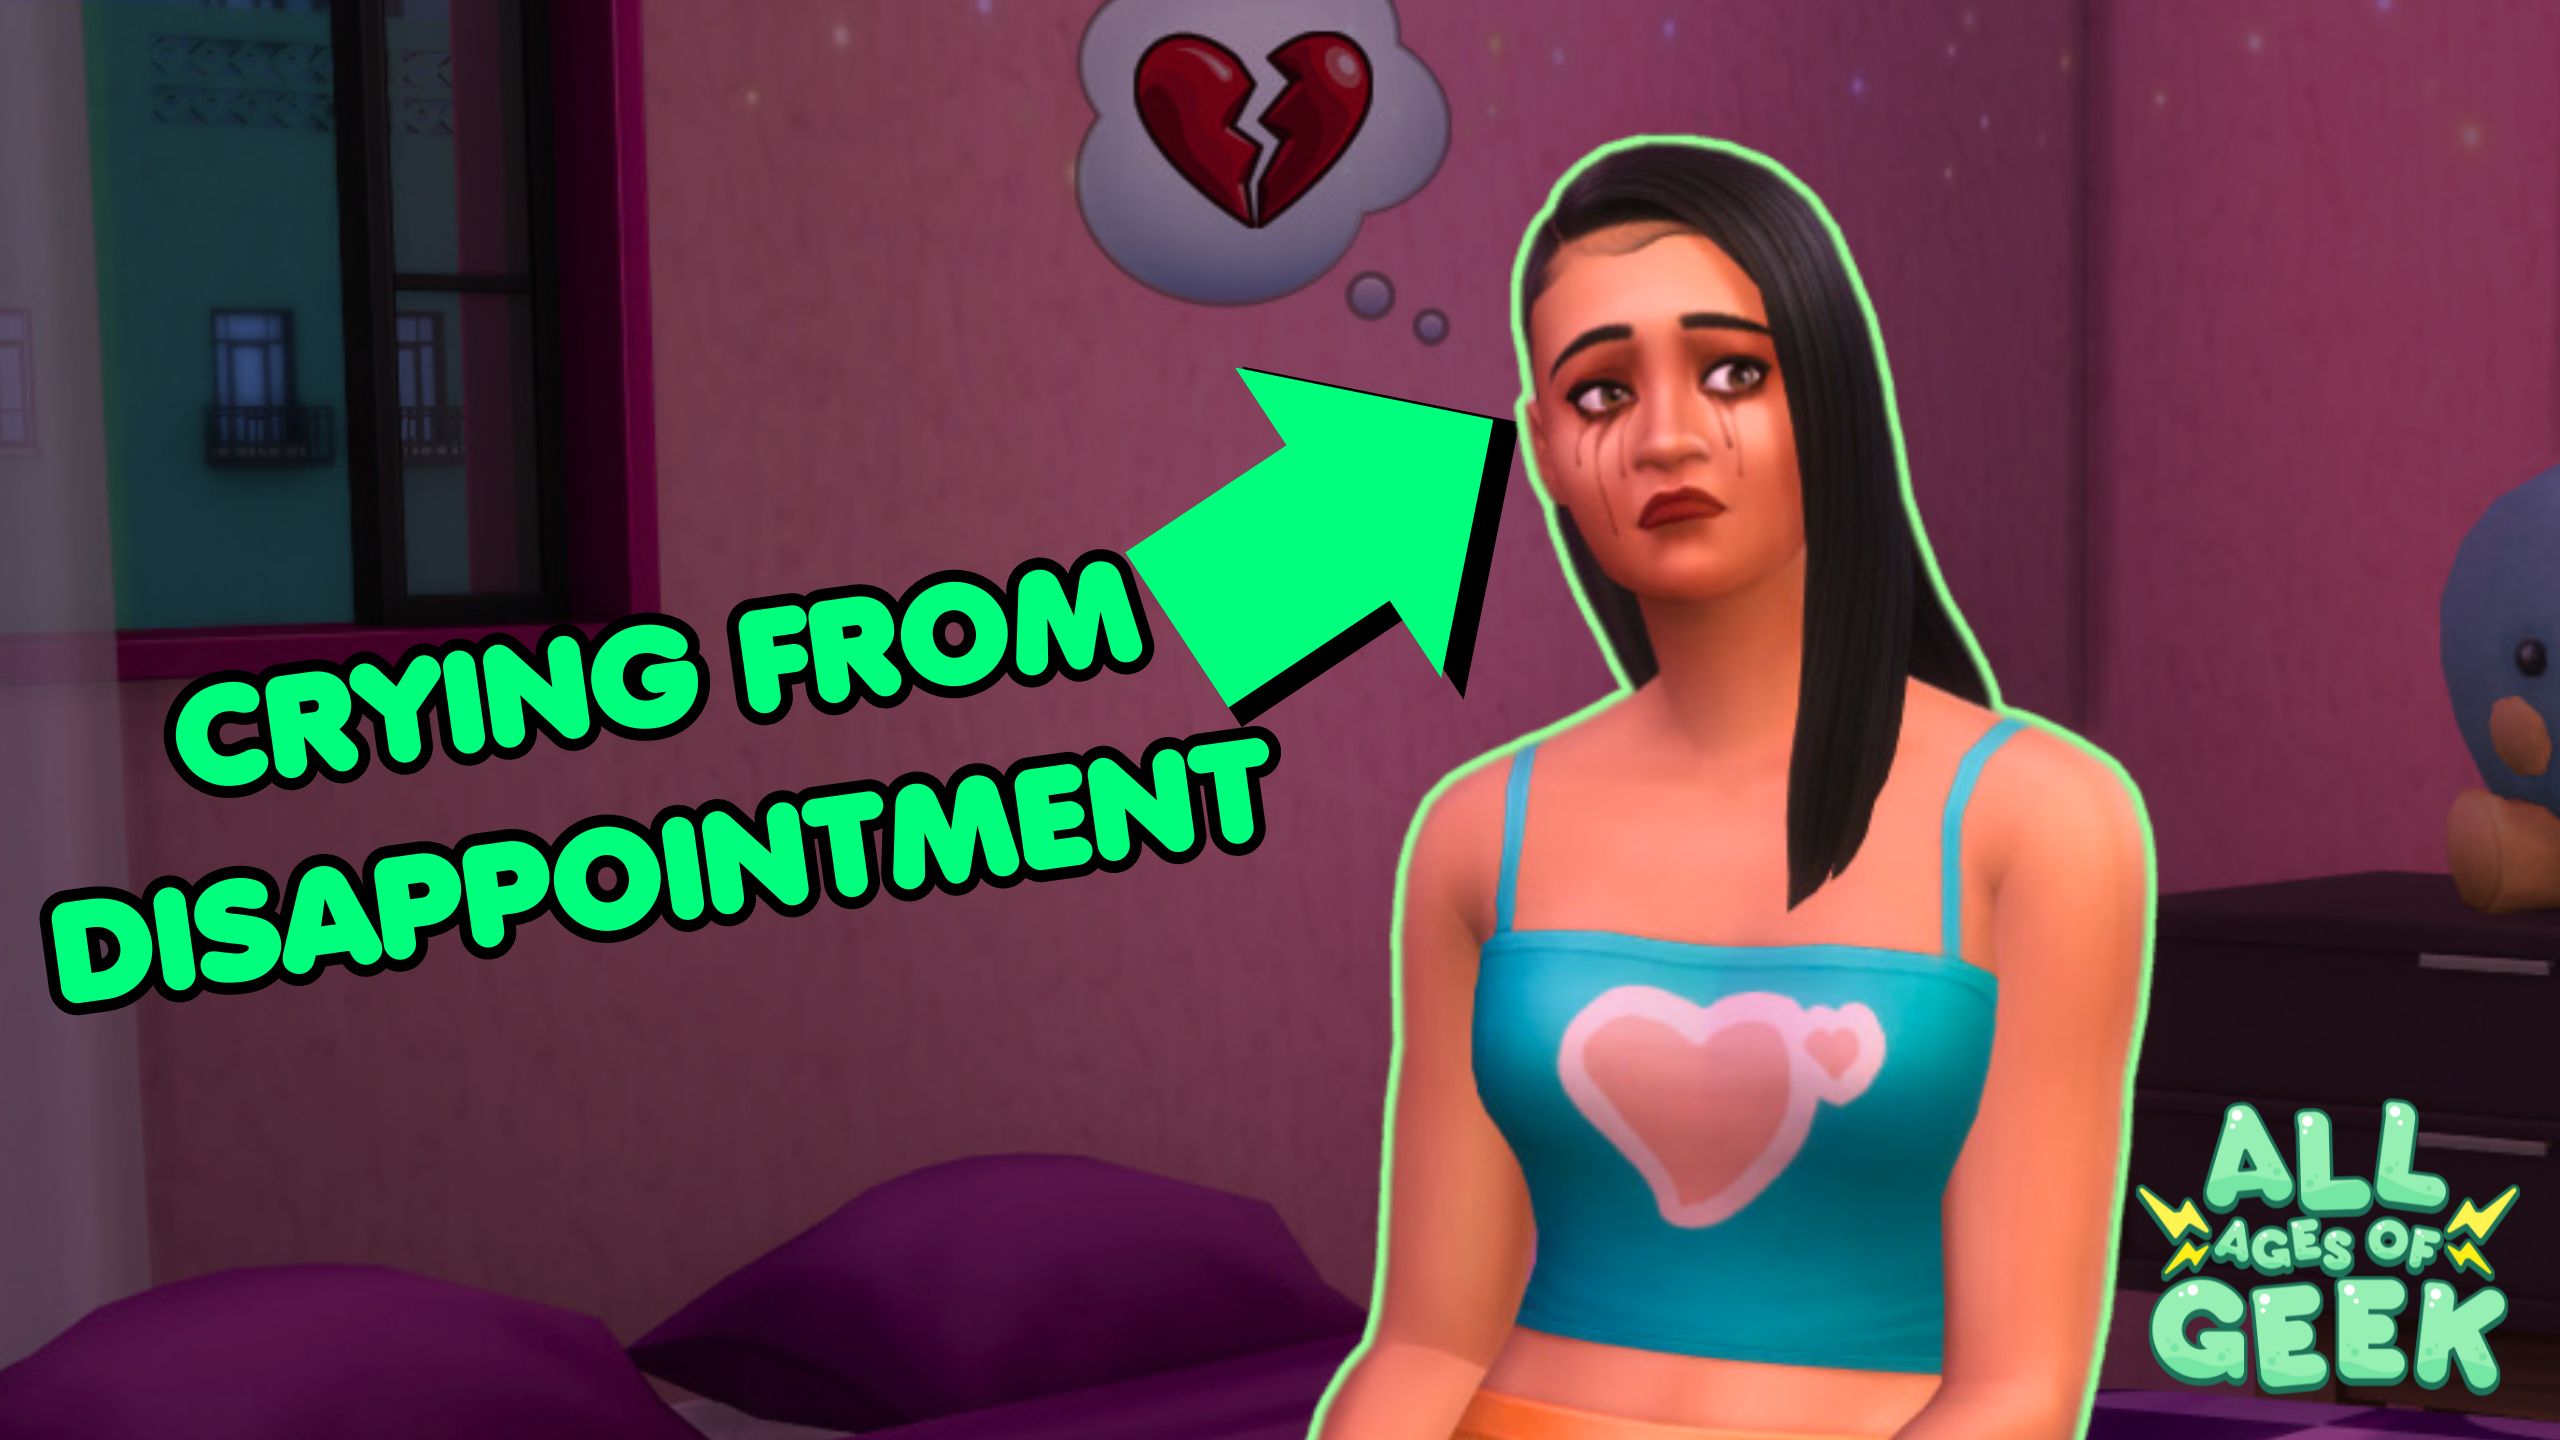 A Sim character from The Sims 4: Lovestruck looking sad and disappointed, with tear streaks on her face. A thought bubble above her head shows a broken heart. A green arrow points to the Sim with the text "Crying from Disappointment" in bold letters. The background is a bedroom with a purple bed and a stuffed animal. The All Ages of Geek logo is in the bottom right corner.